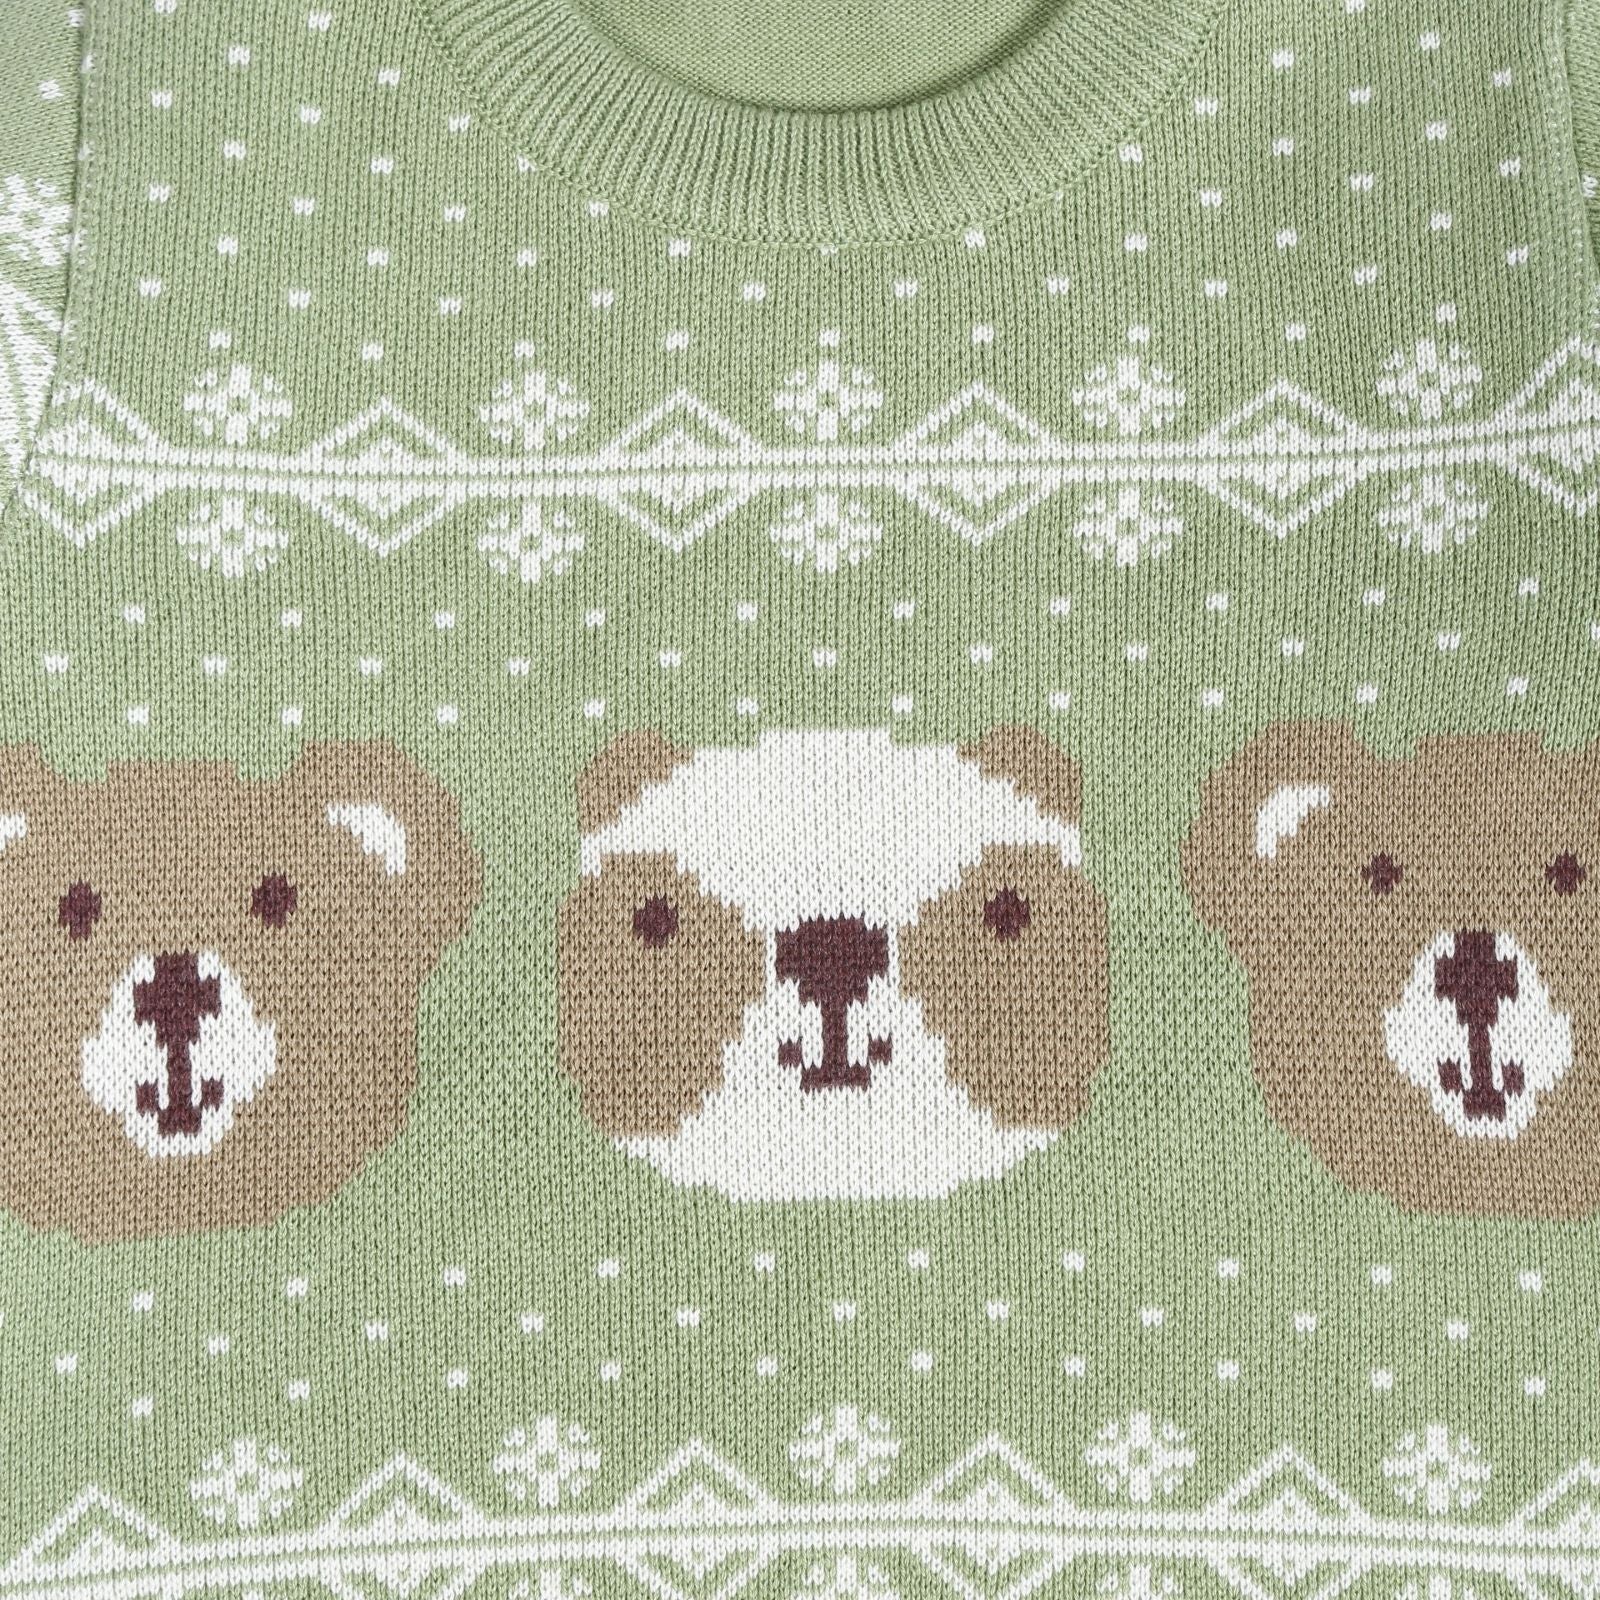 Greendeer Enchanting Bear,  Cheerful Dog & Happy Baby Animal 100% Cotton Sweater with Lower  Set of 4